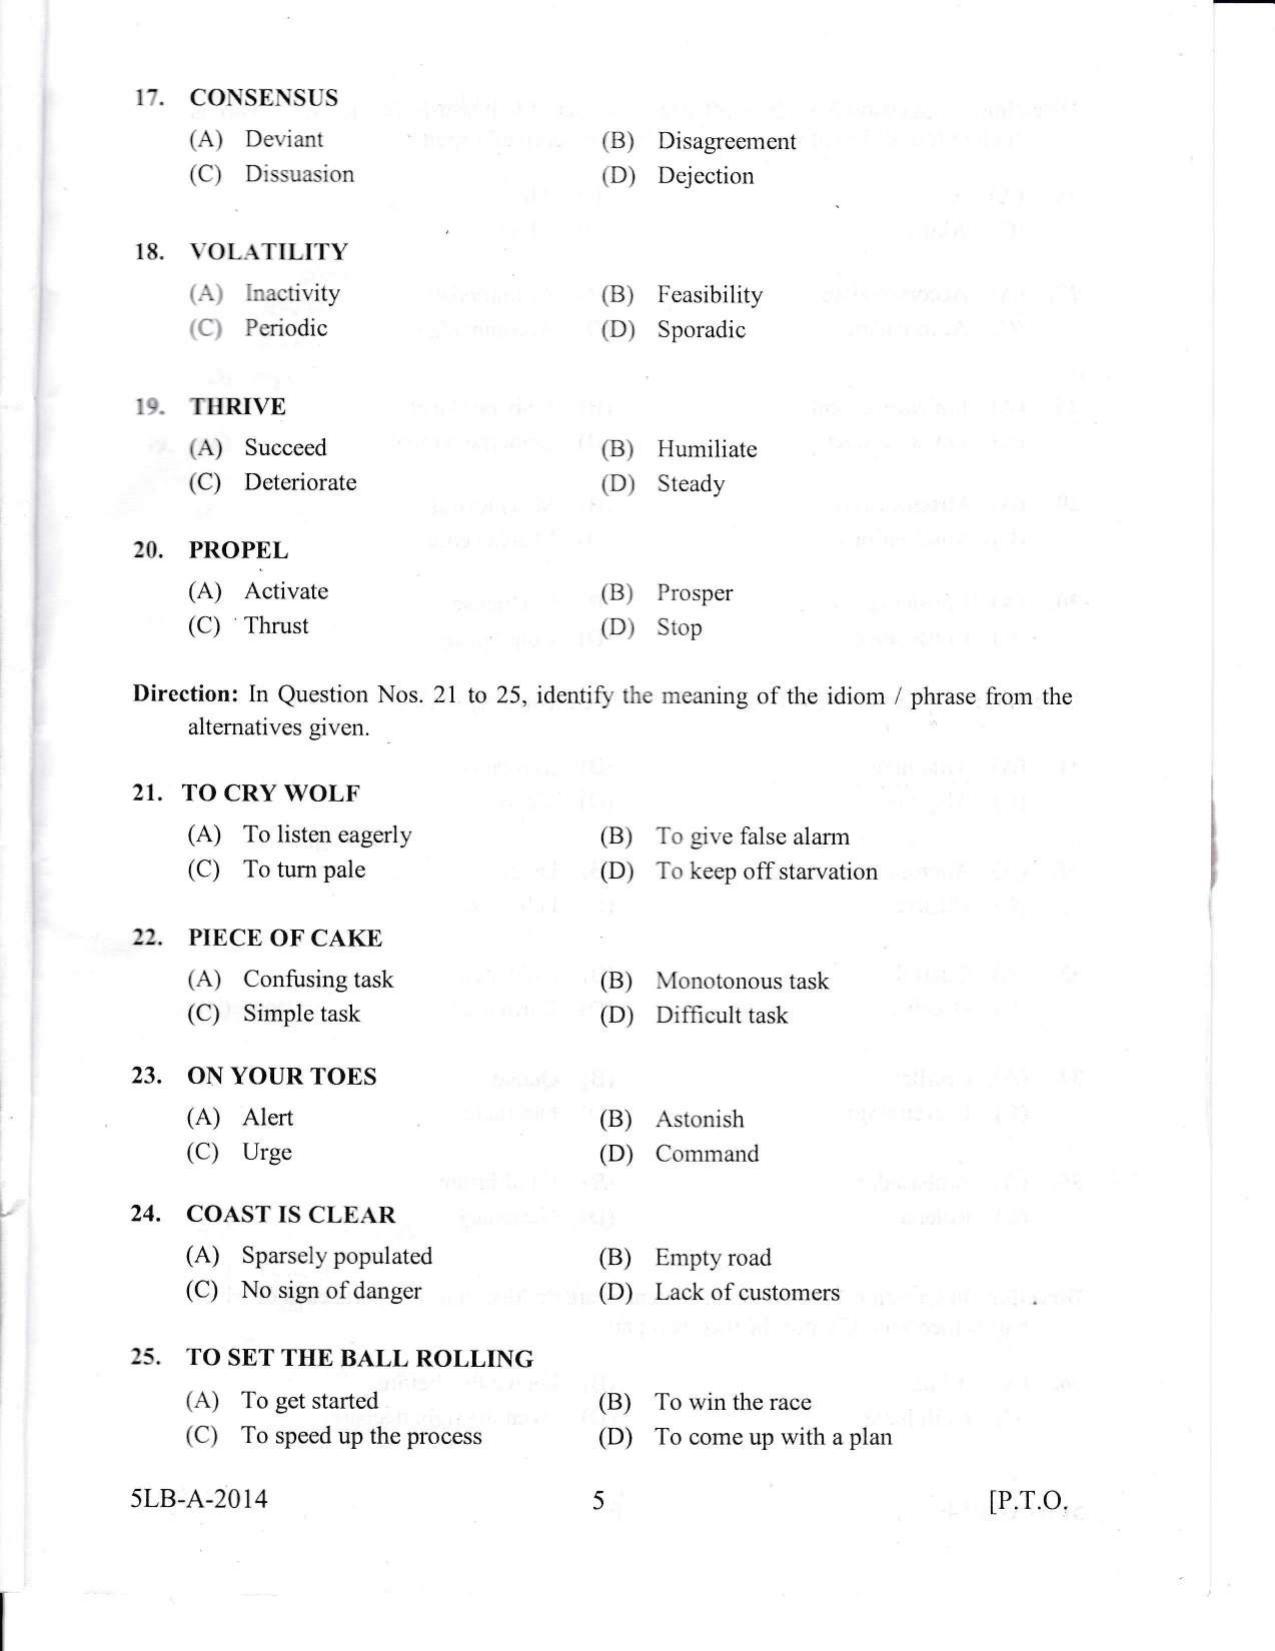 KLEE 5 Year LLB Exam 2014 Question Paper - Page 5